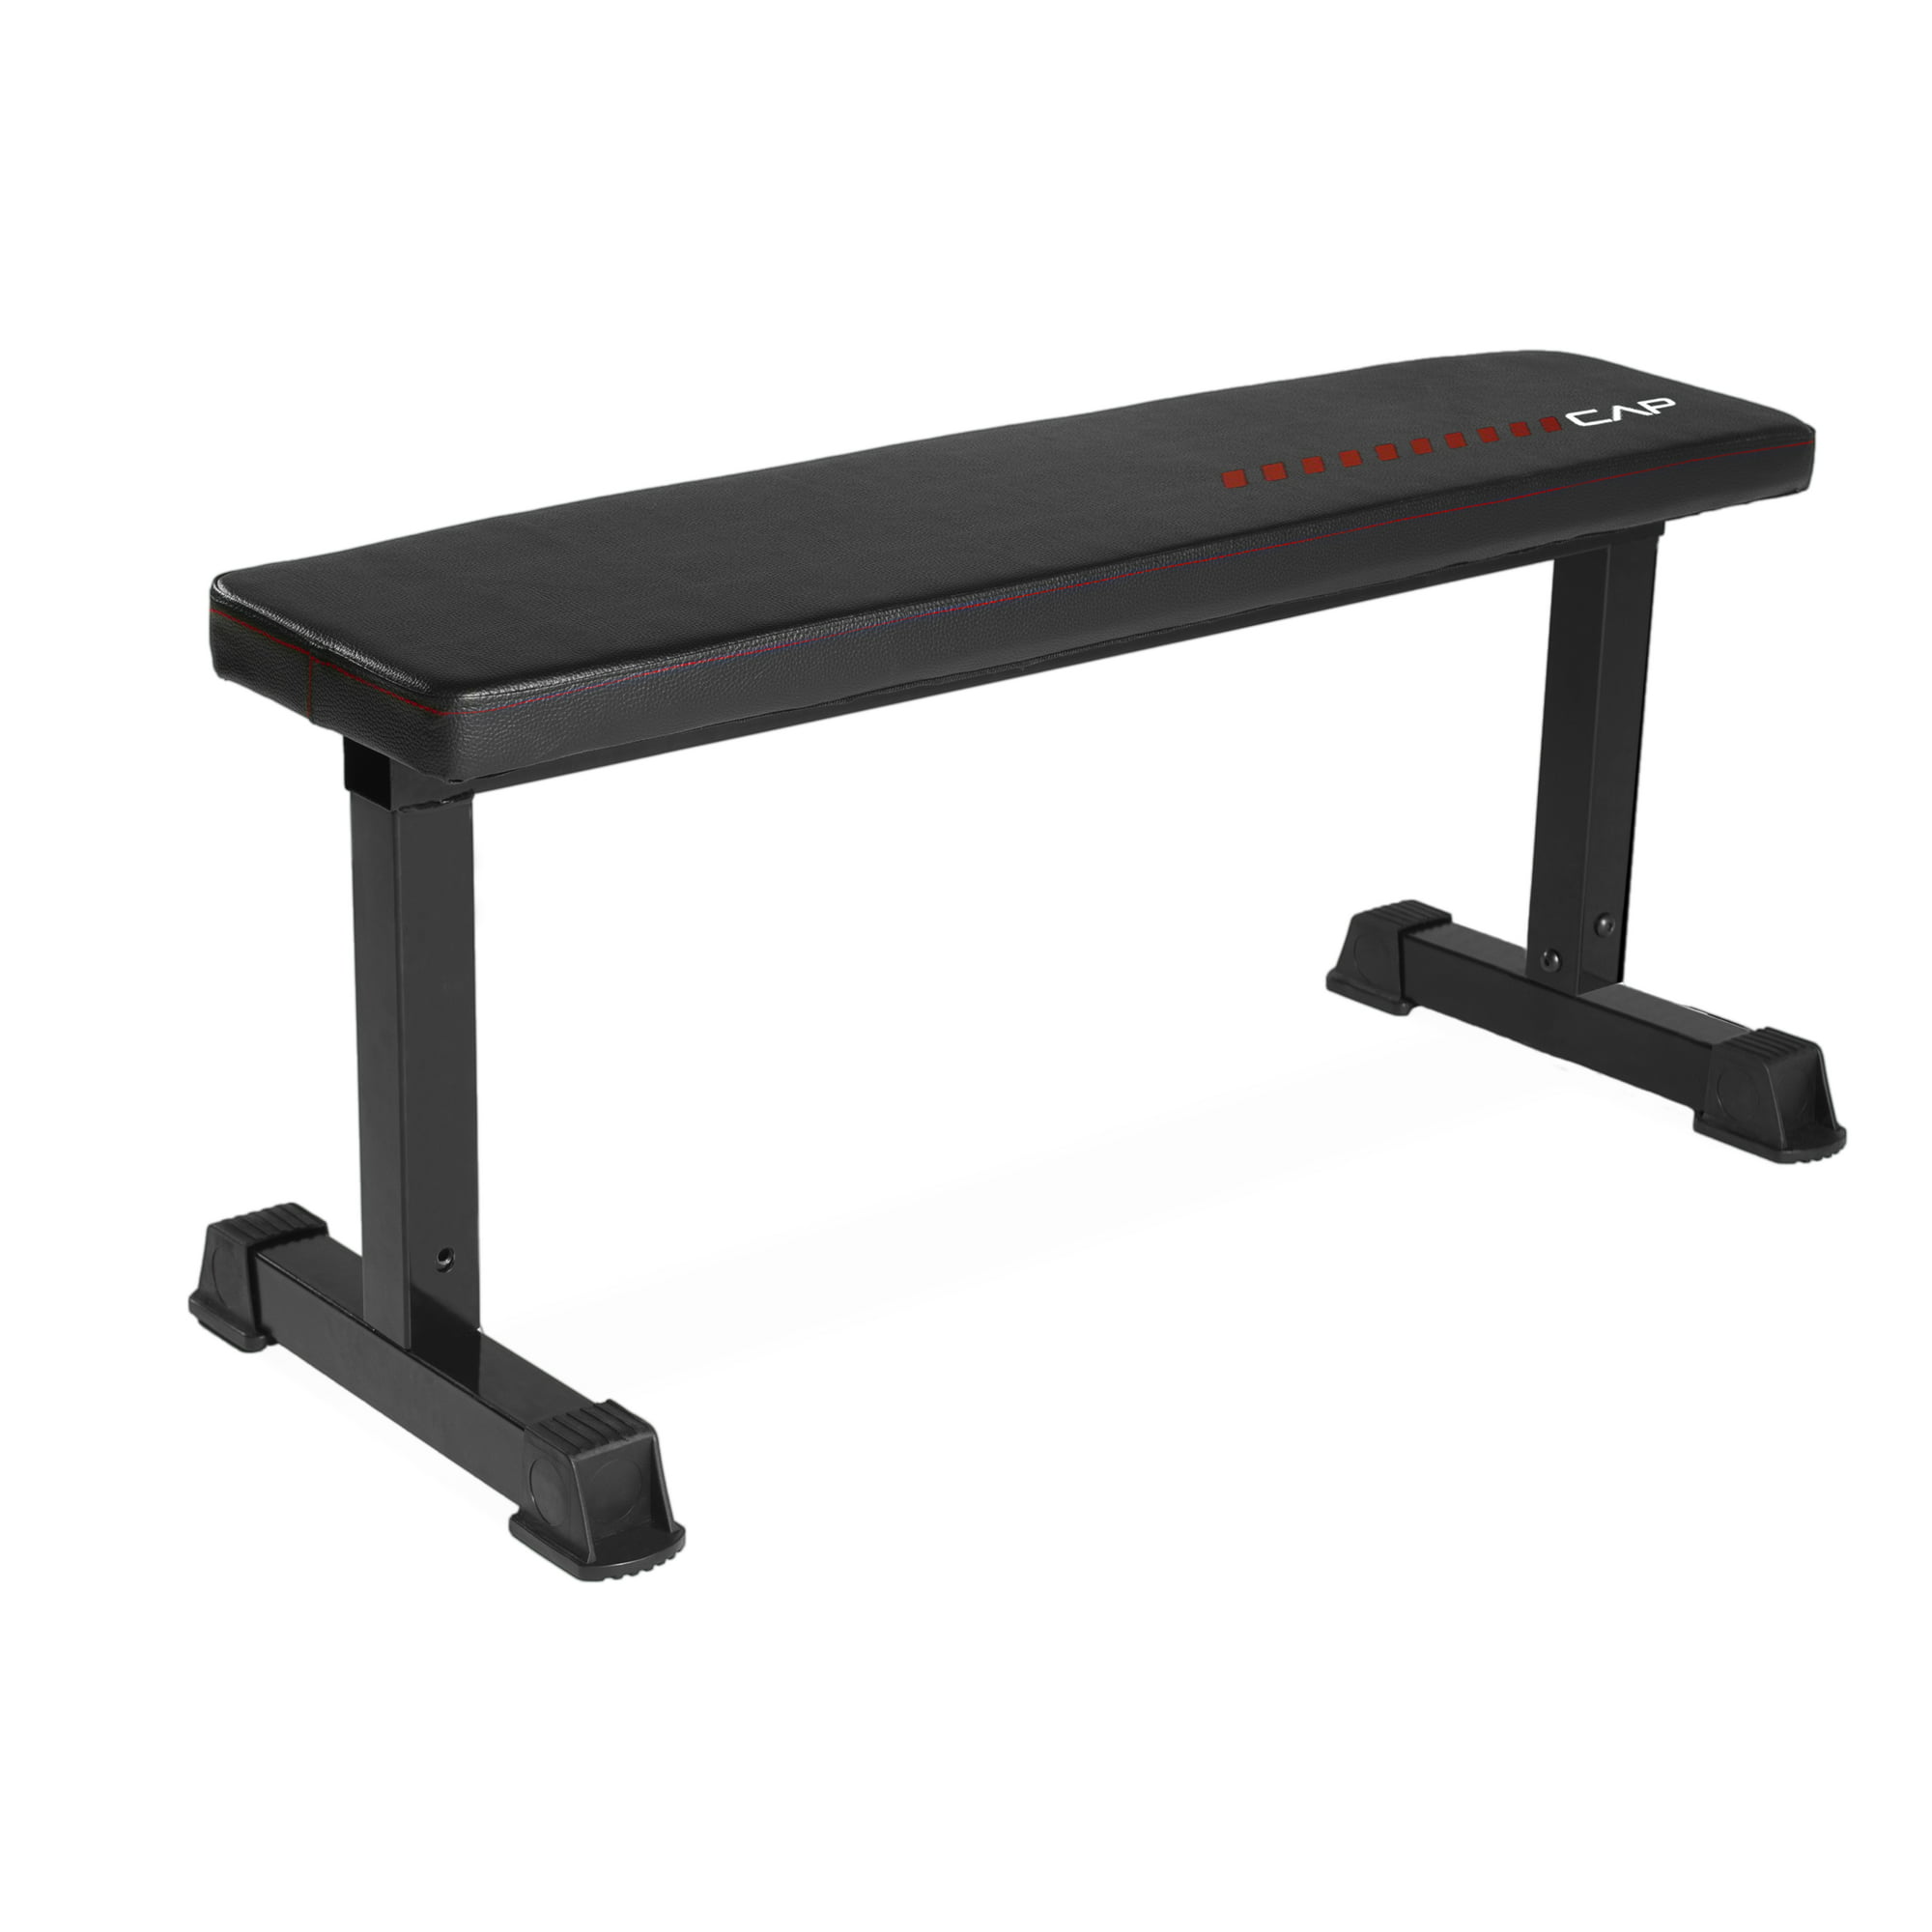 CAP Strength Universal Flat Weight Bench $30 + Free Shipping w/ Walmart+ or on $35+